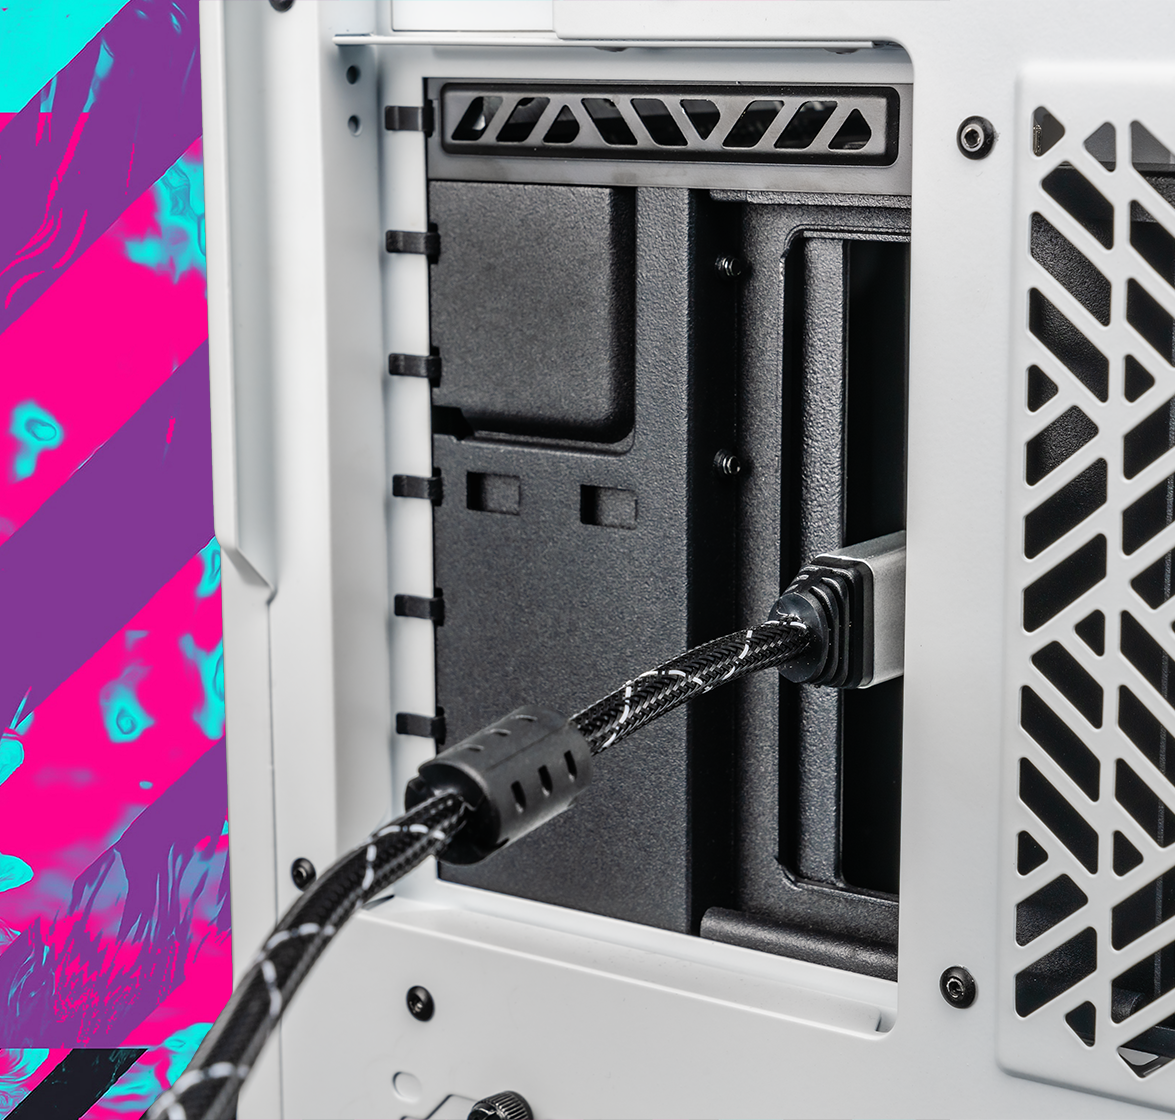 Compatible with all Standard ATX Chassis